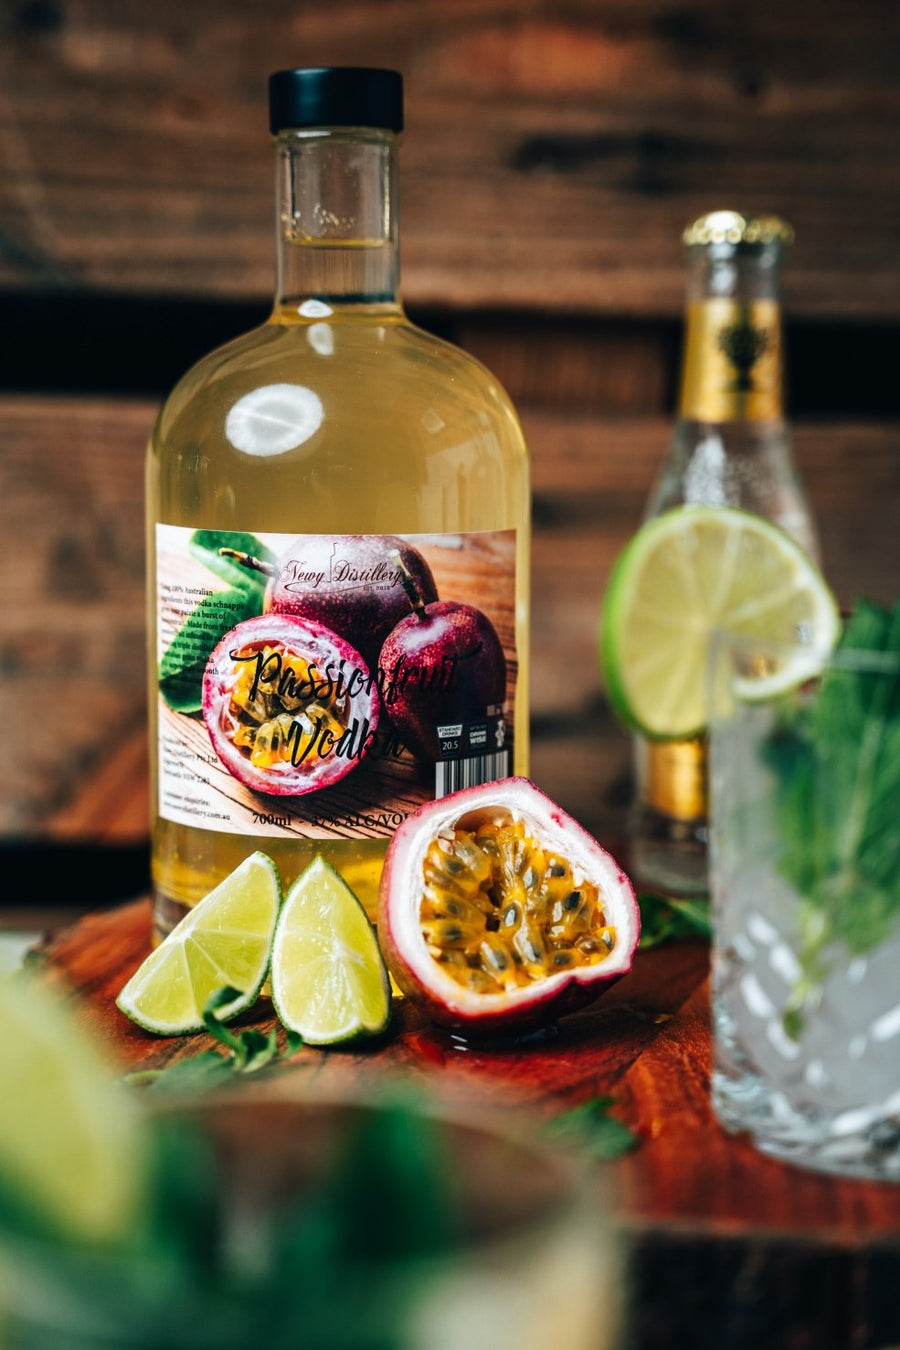 Passionfruit Vodka fruit infused vodka by Newy Distillery. 700ml bottle displayed on wooden bench with fresh passionfruit and lime.